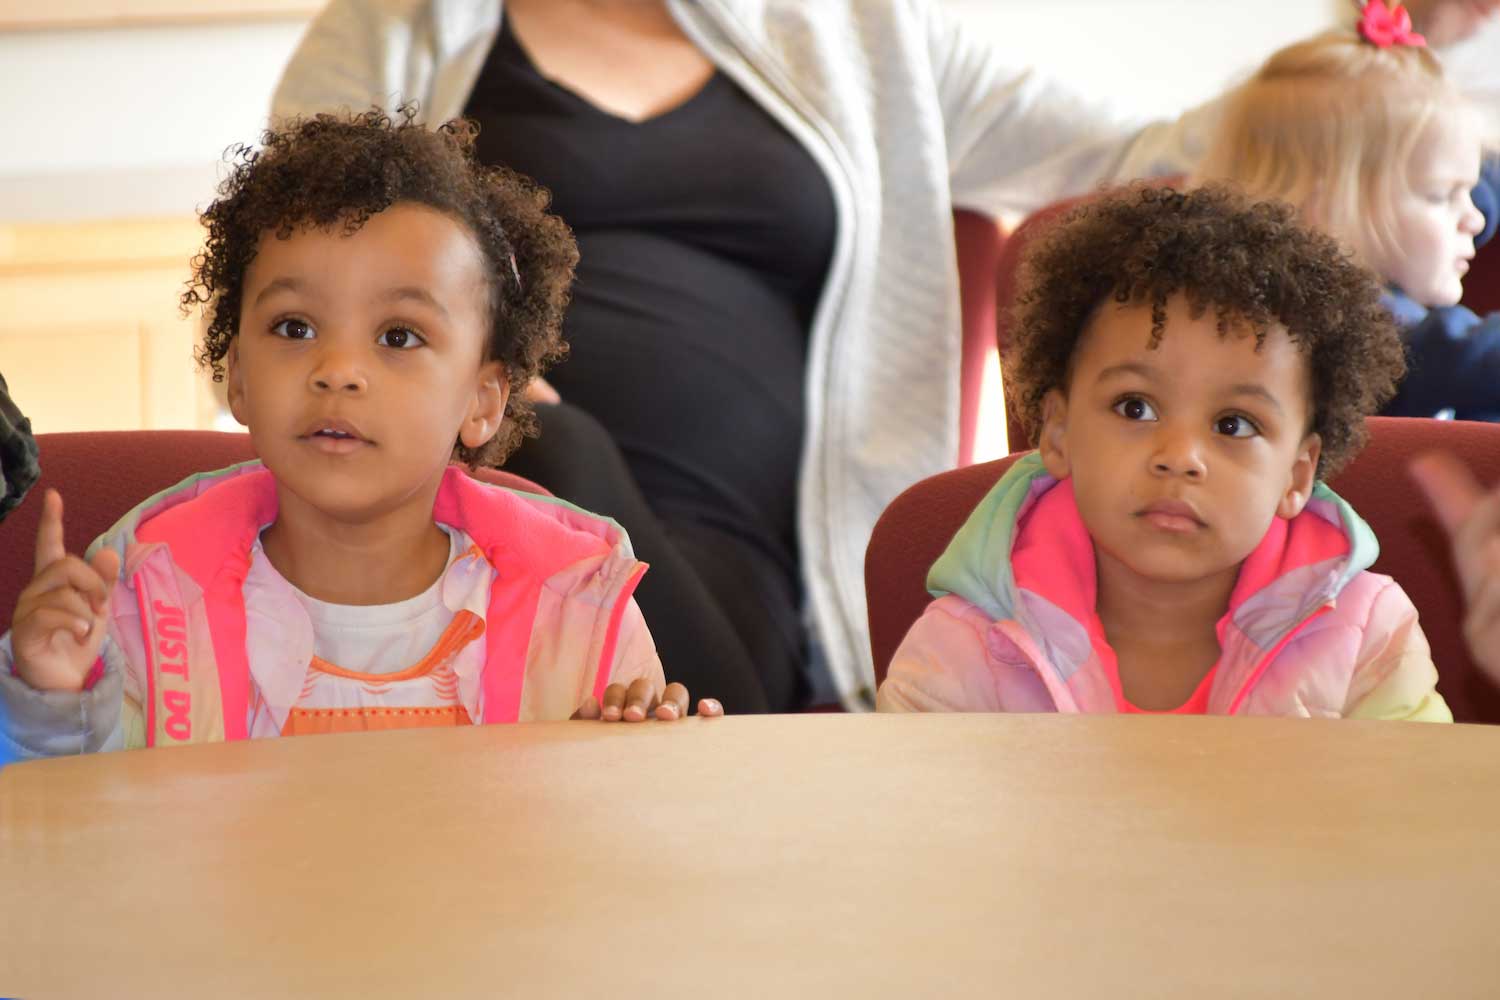 Two young children sitting attentively at a table.